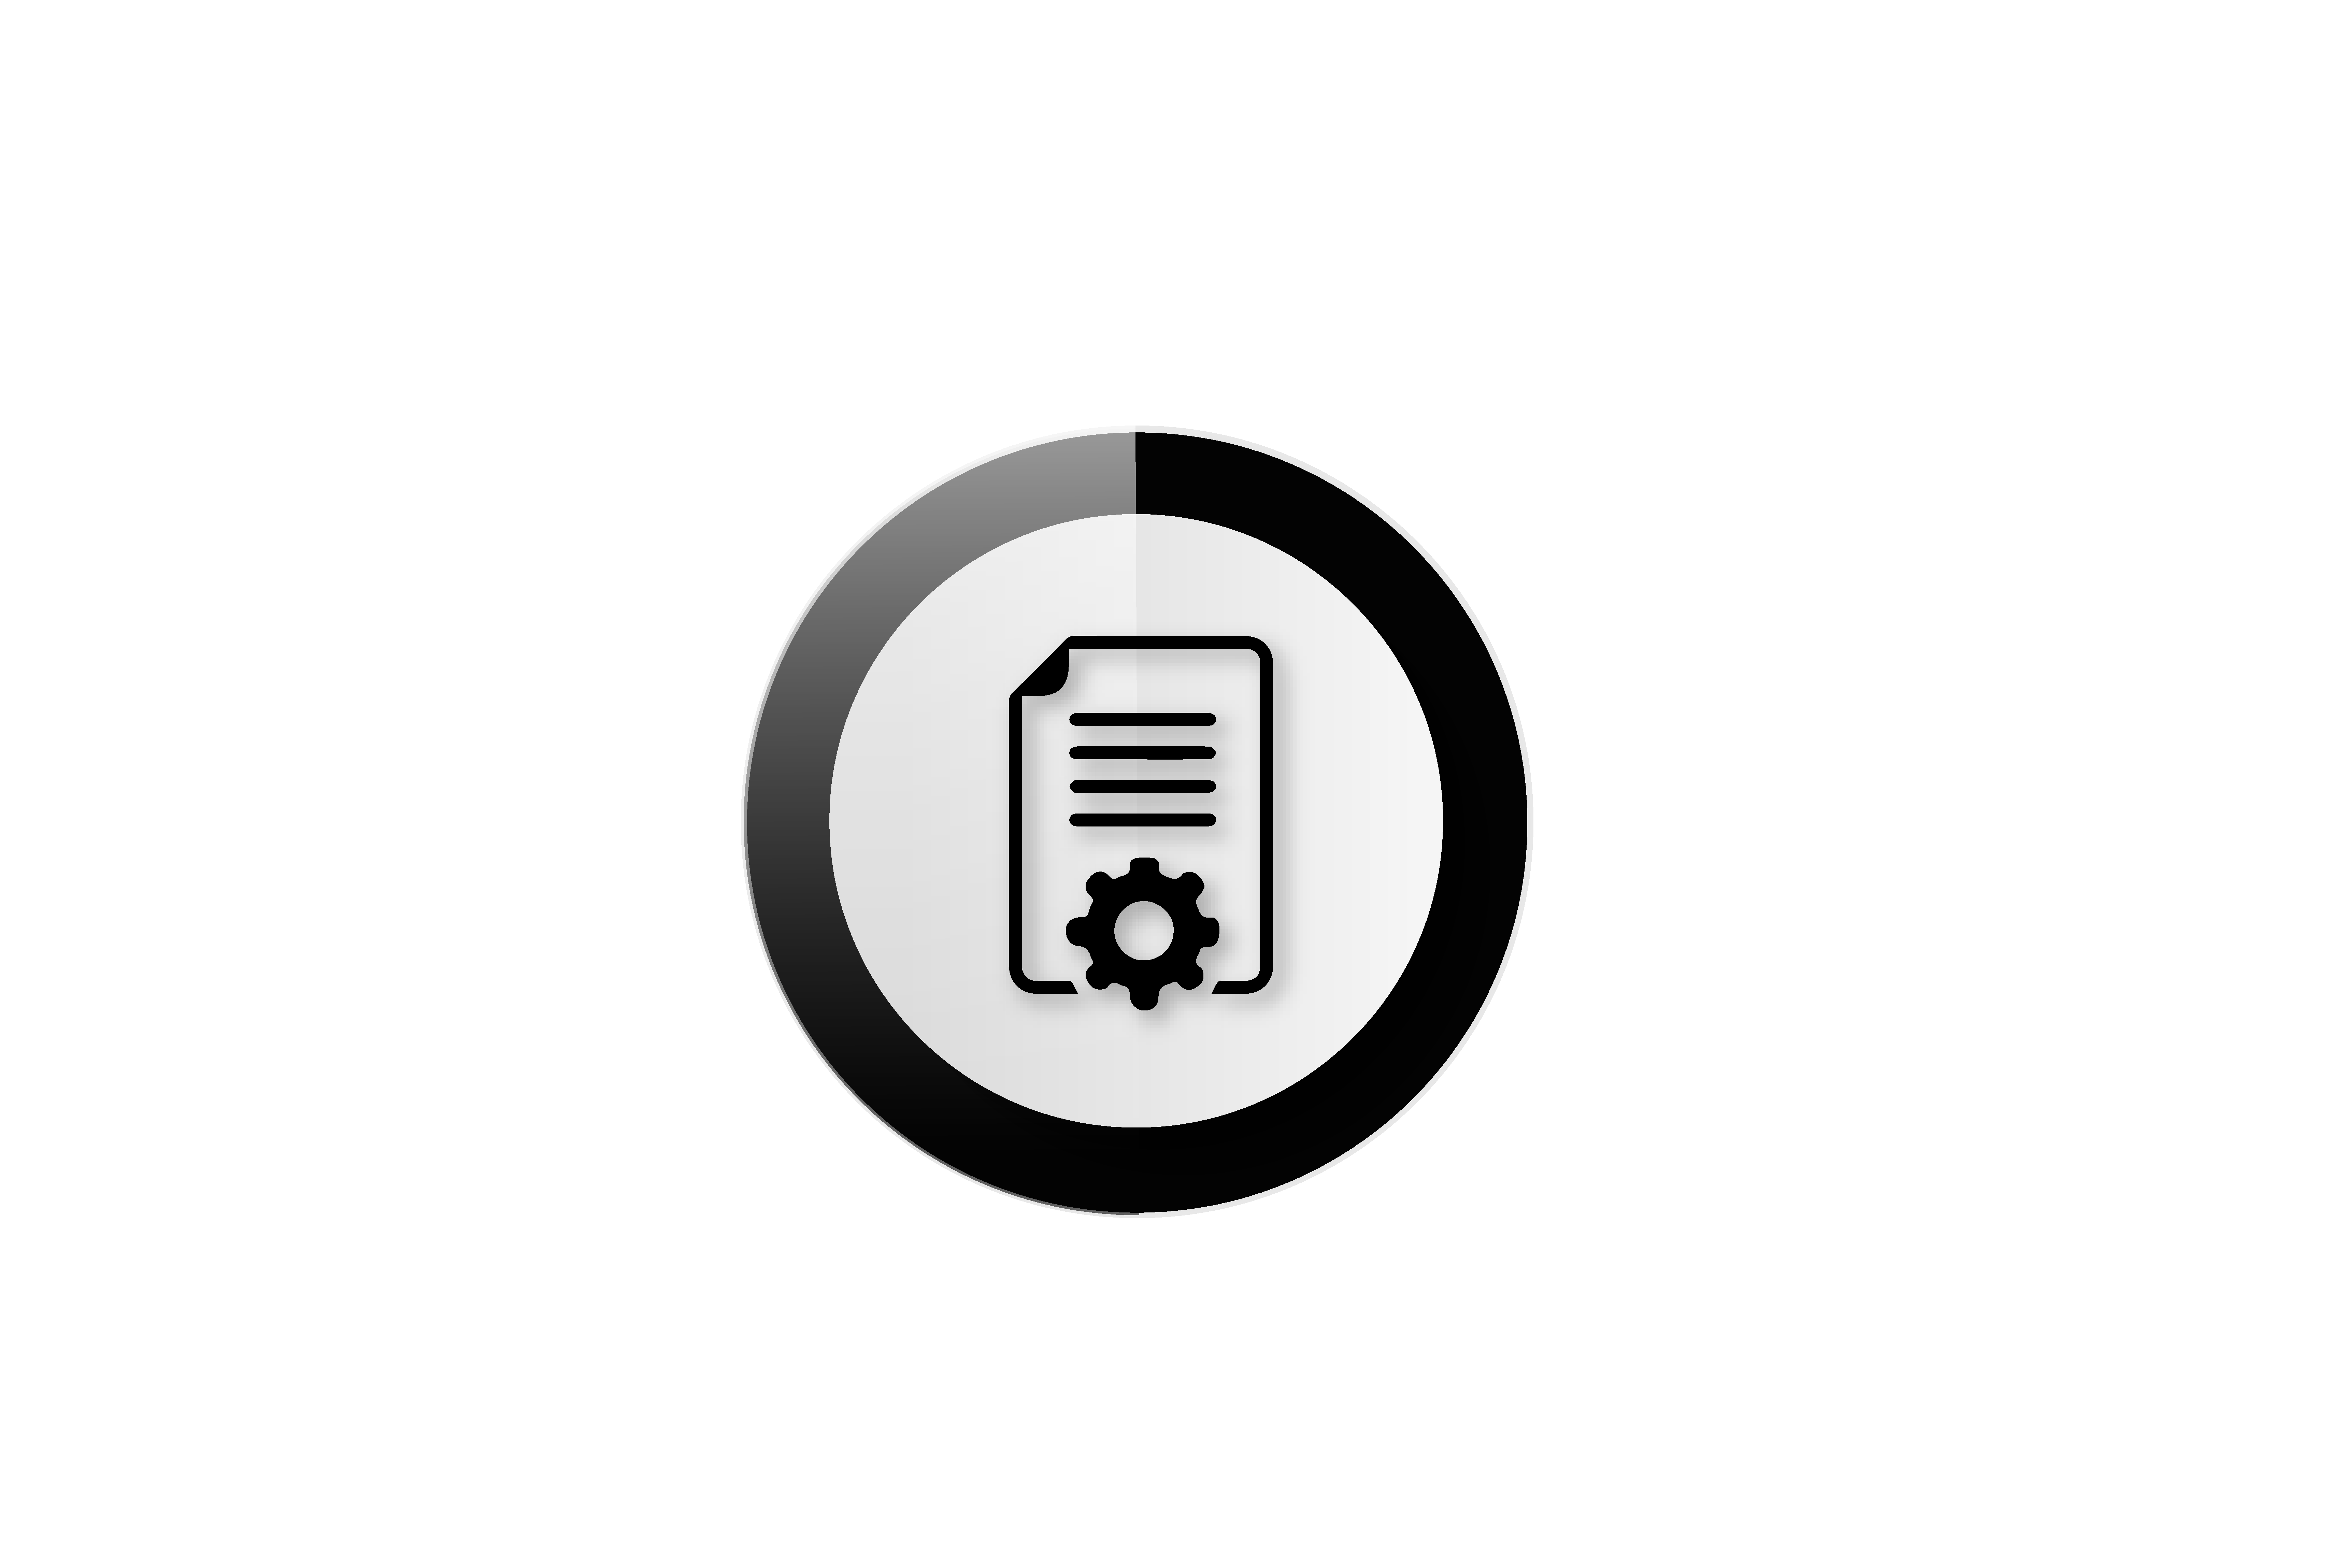 A black and white icon of a document with an gear on it.